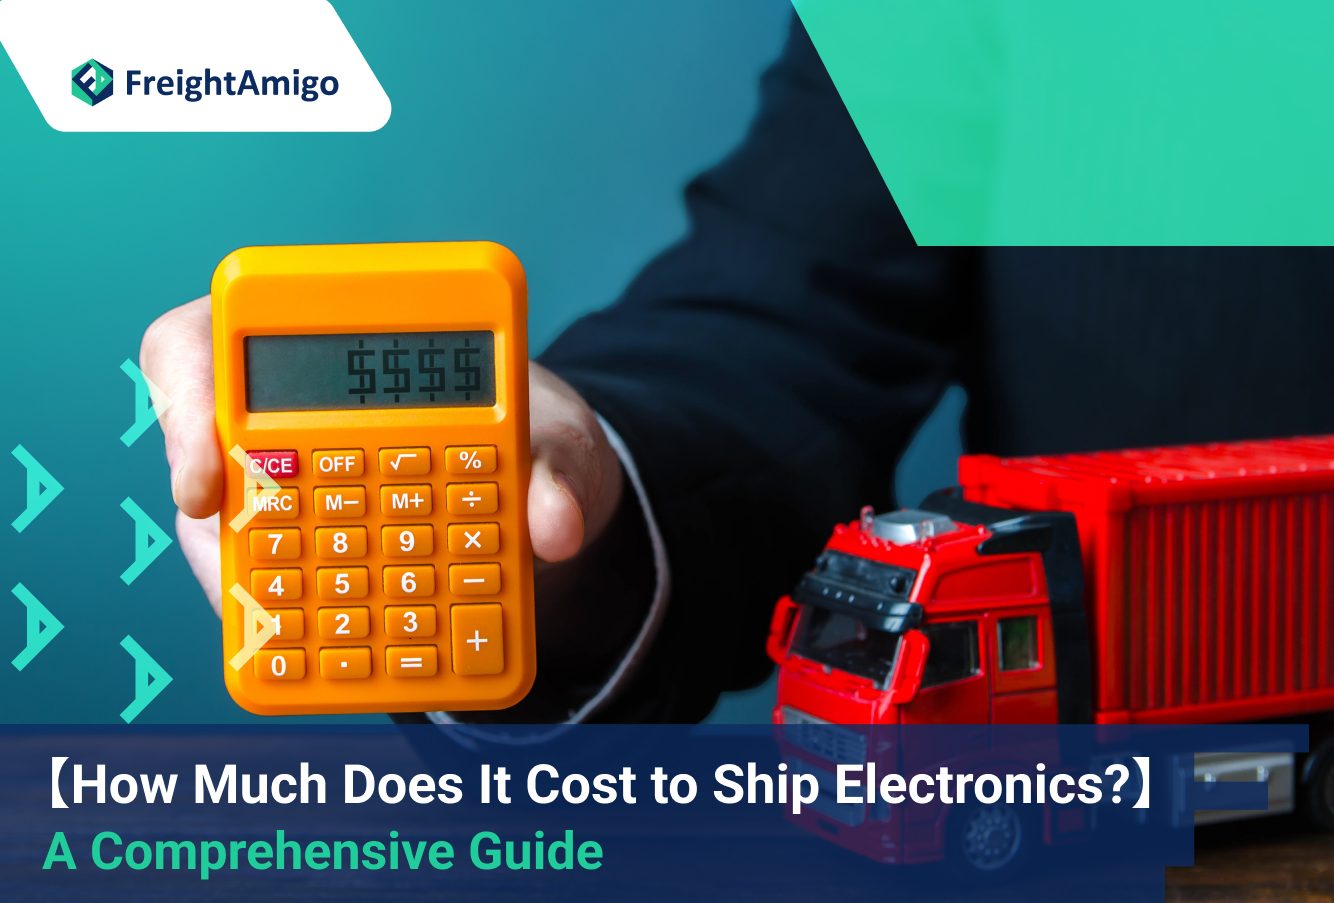 How Much Does It Cost to Ship Electronics? A Comprehensive Guide